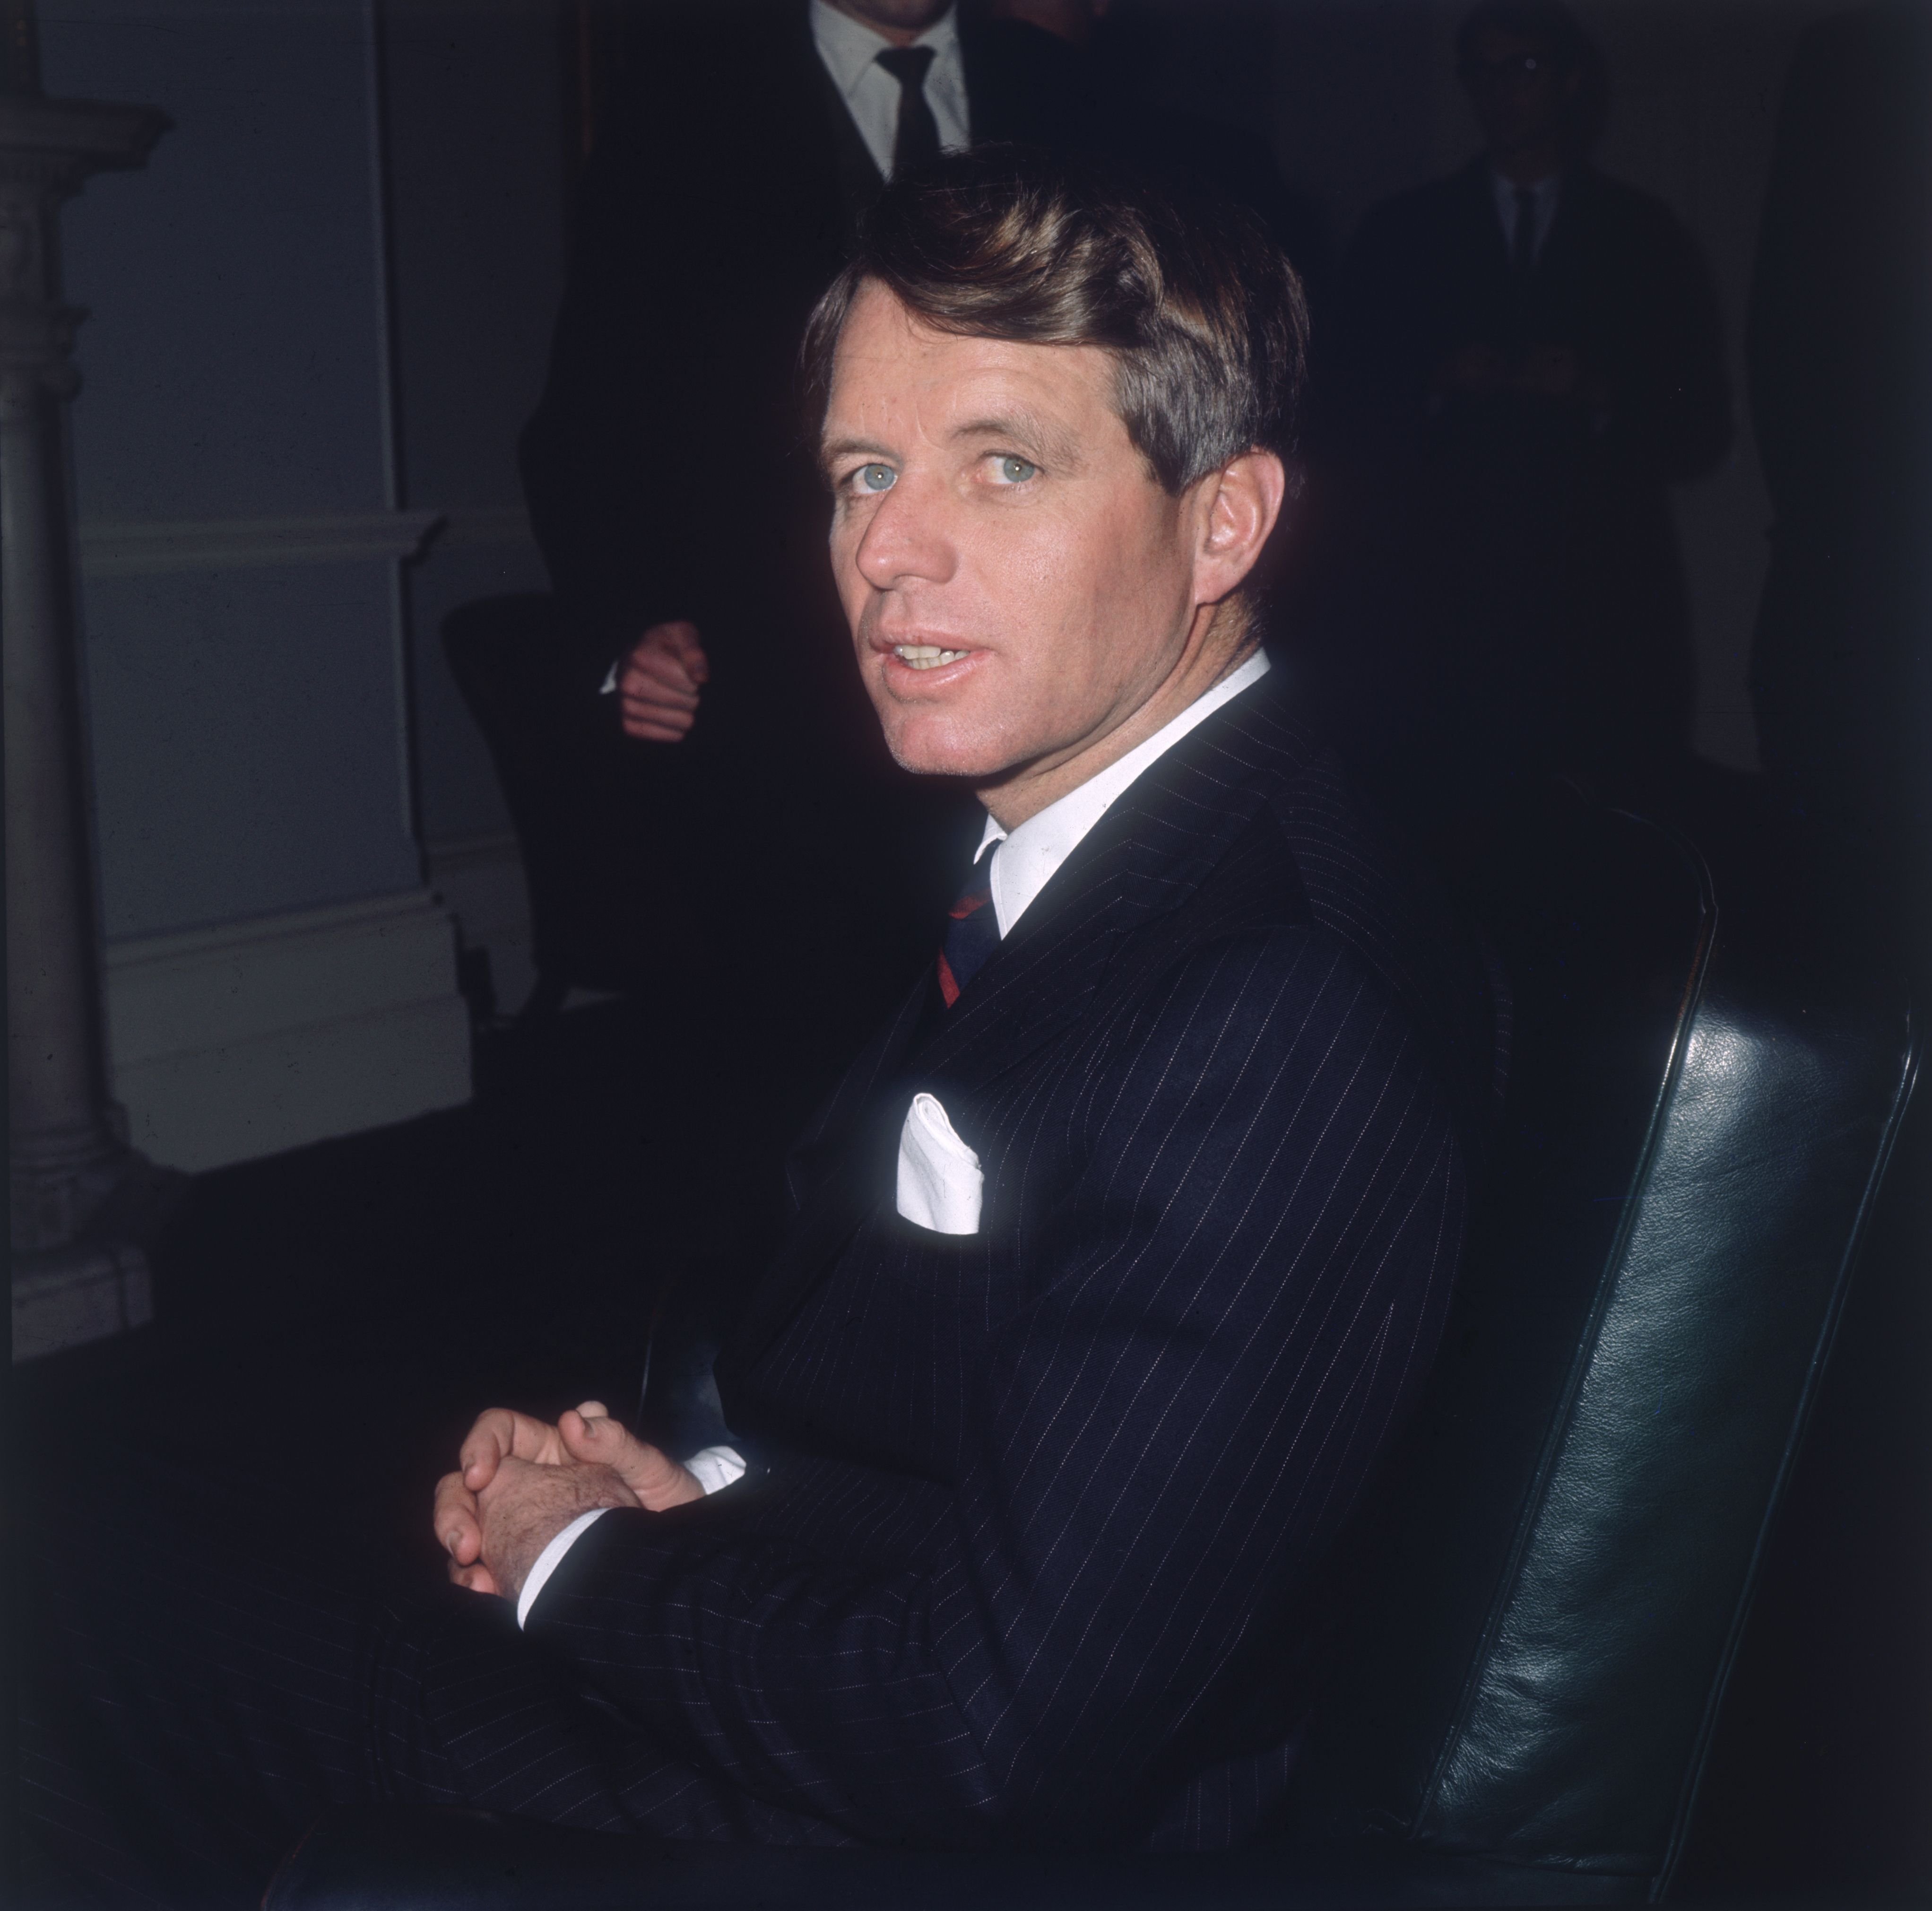 Senator Robert Kennedy (1925 - 1968) during a visit to London, May 1967. | Photo: Getty Images